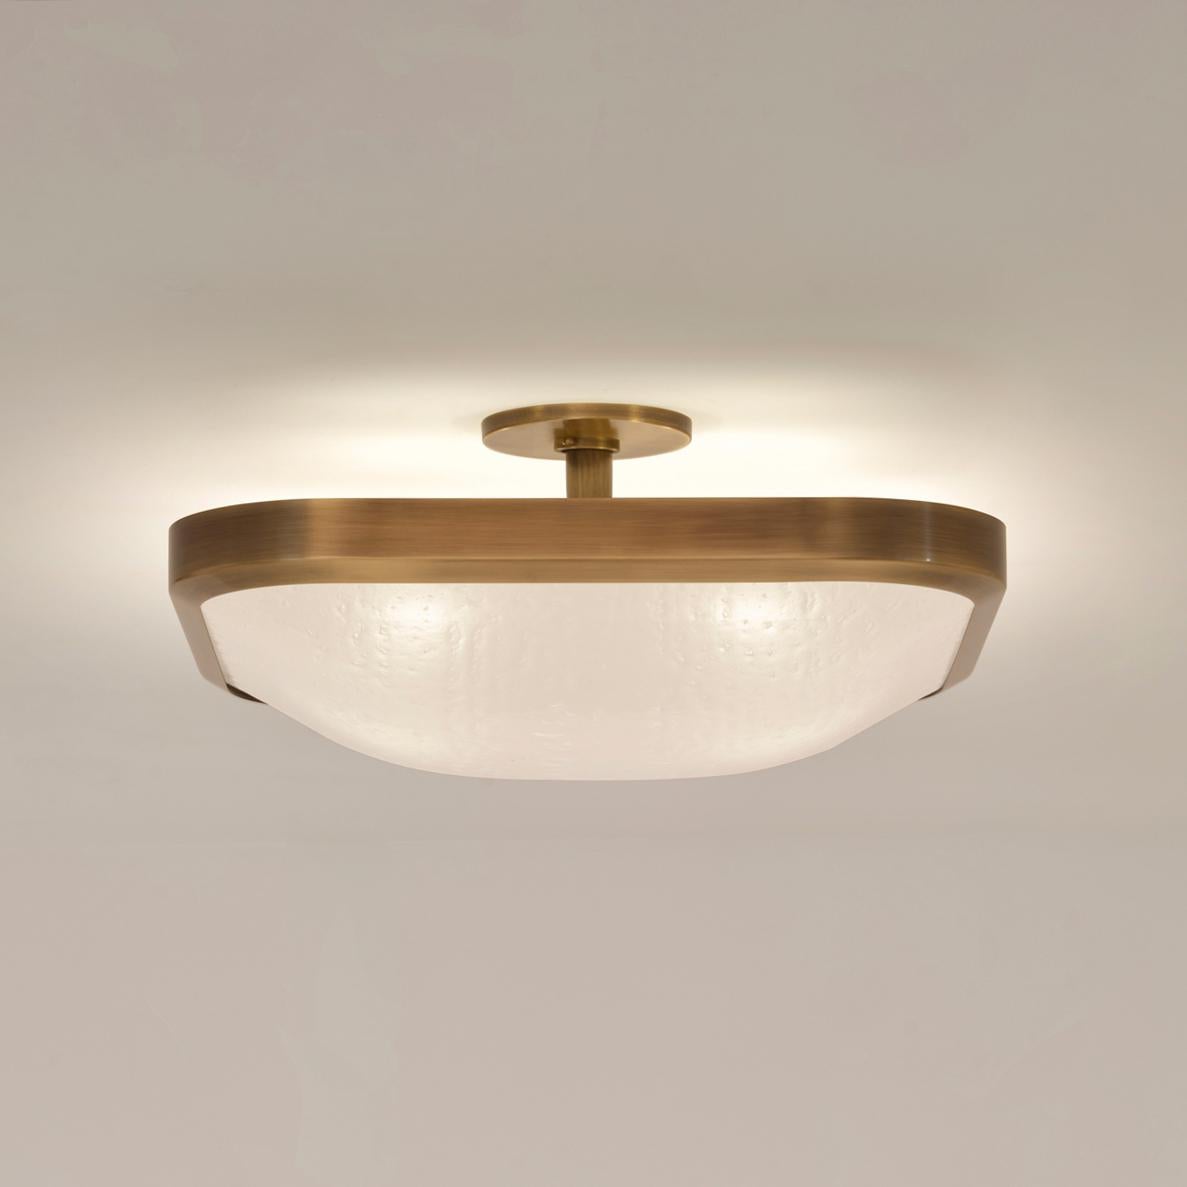 The Uno Square ceiling light exemplifies simple elegance via its clean profile designed around a single Murano glass shade.

Shown in the primary images in Bronzo Ottone-subsequent pictures show the fixture in other featured finishes.

Starting at $